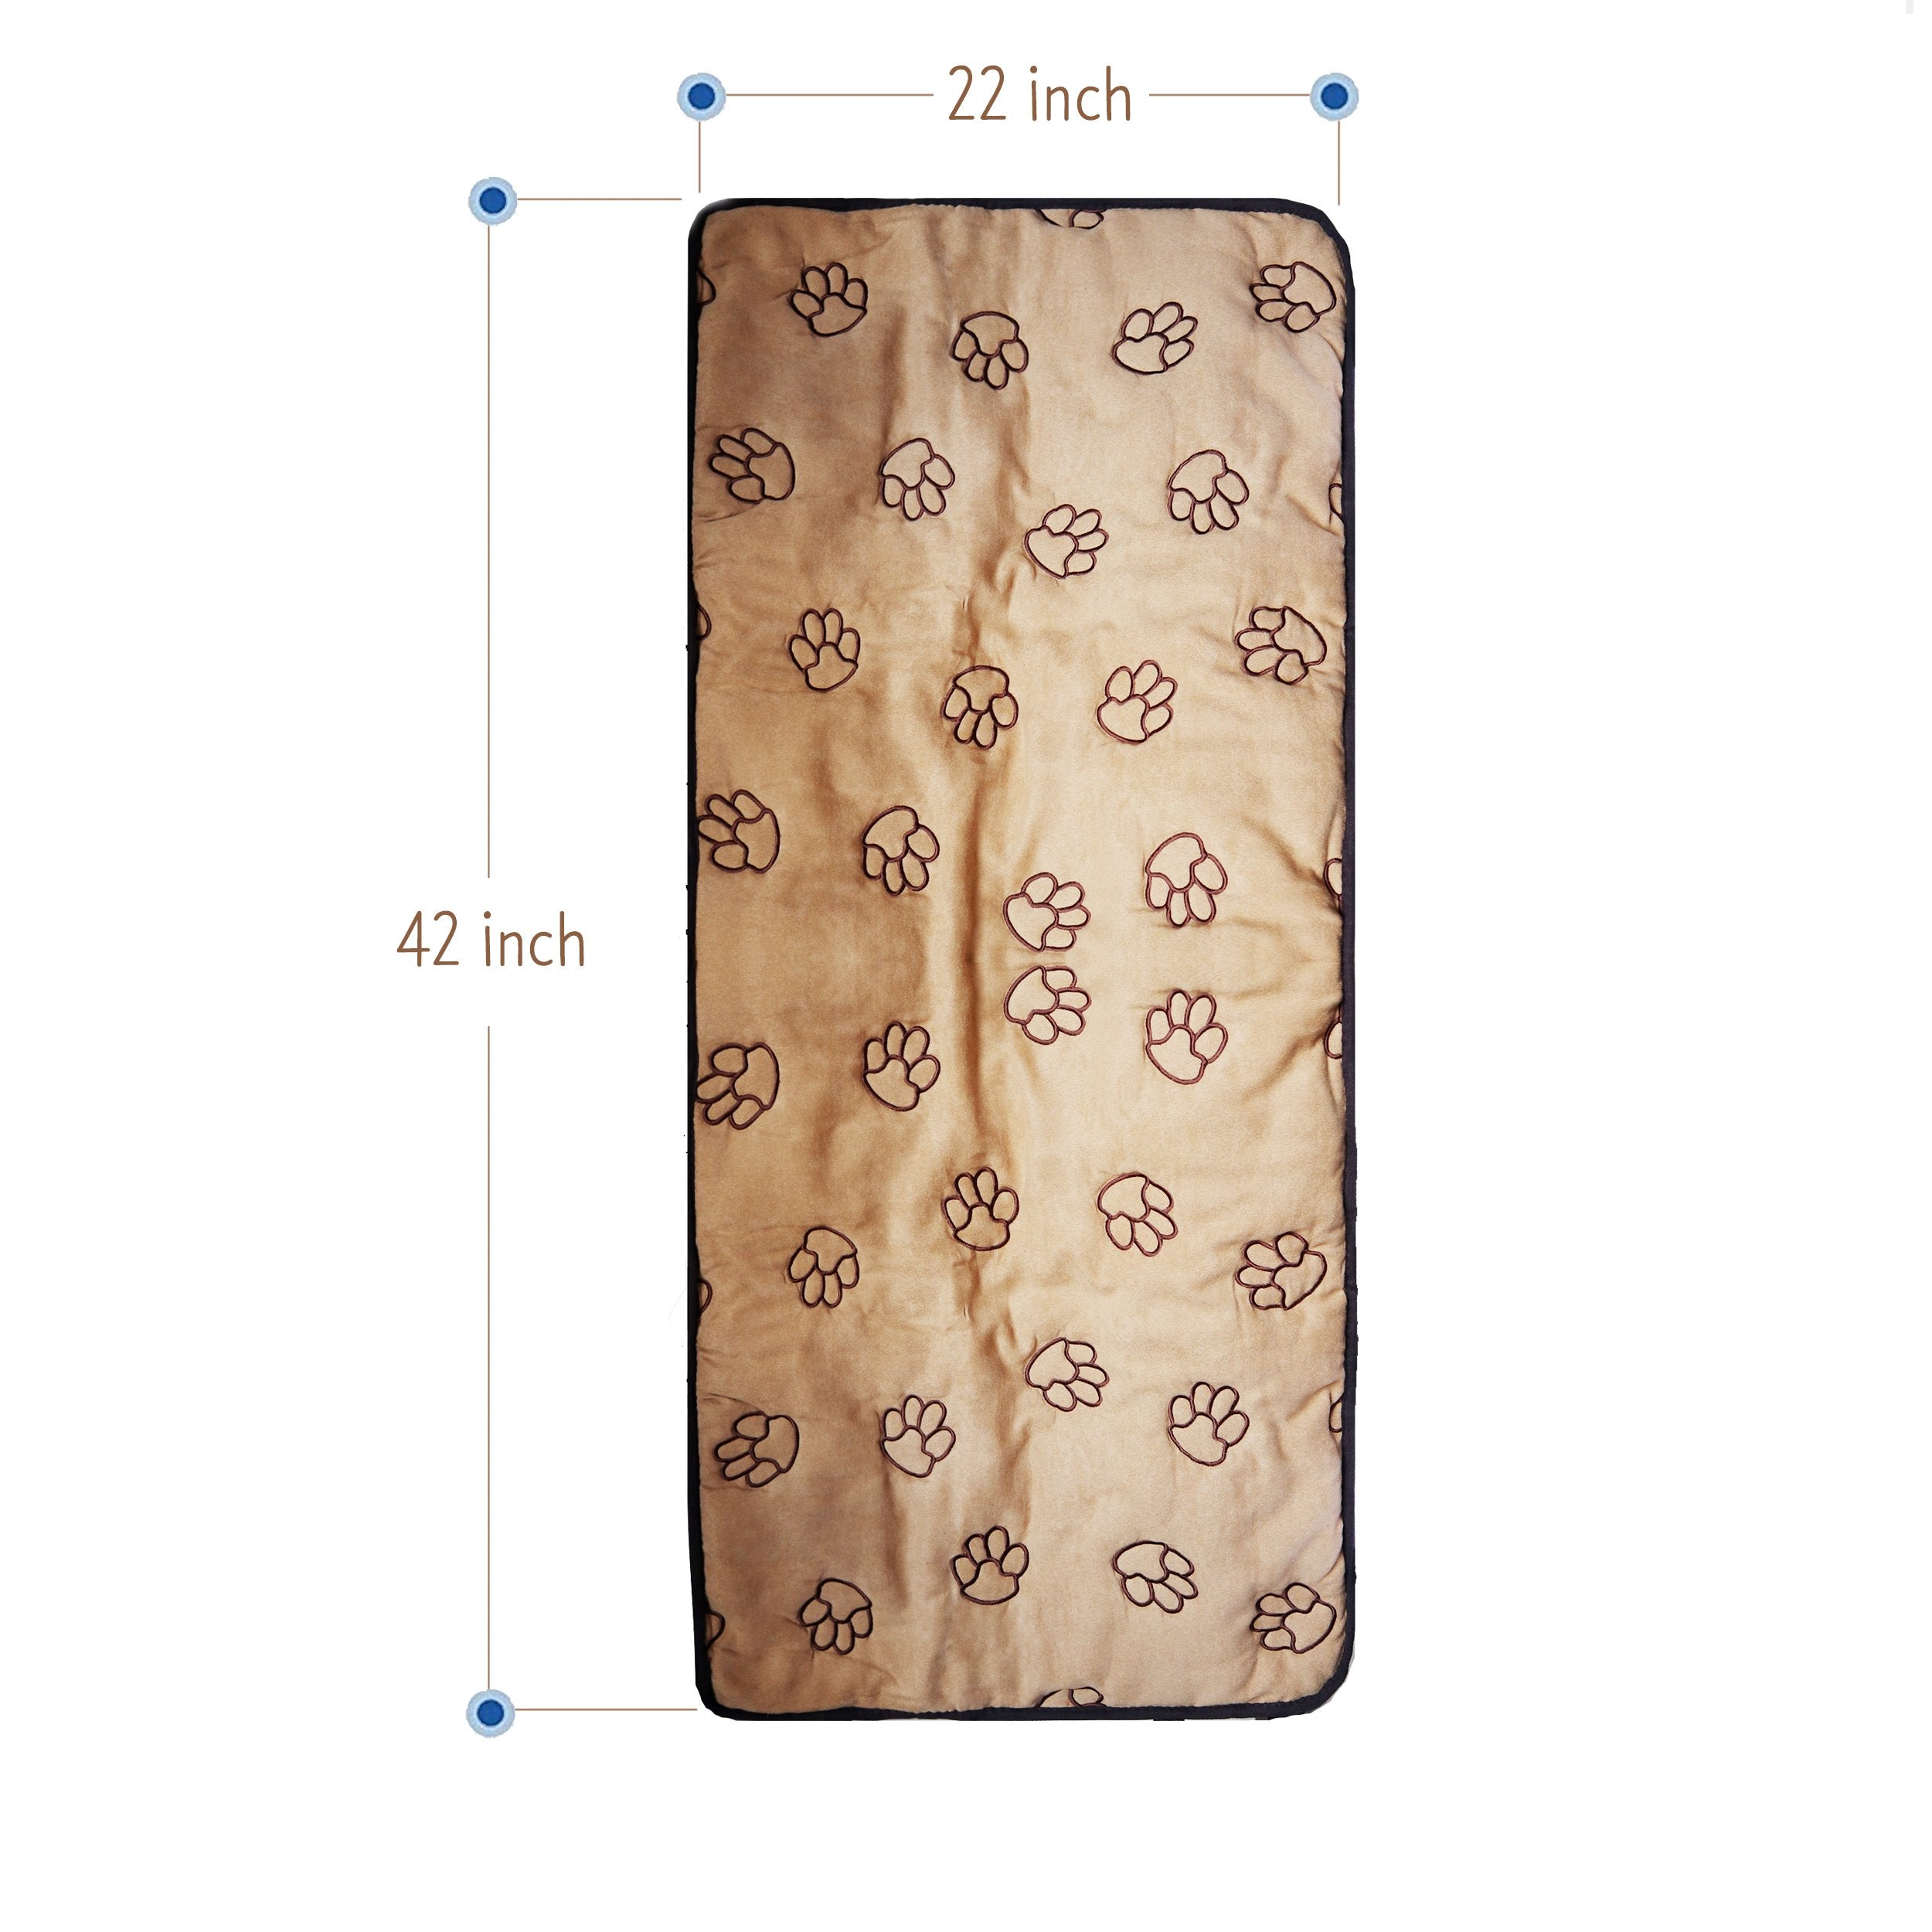 Cruising Companion Single Car Seat Cover Camel with Dark Brown Paw Print Pattern for Travel with Dogs for No Messy Hair on seats Full Size measurements 42 Inch x 22 Inch 